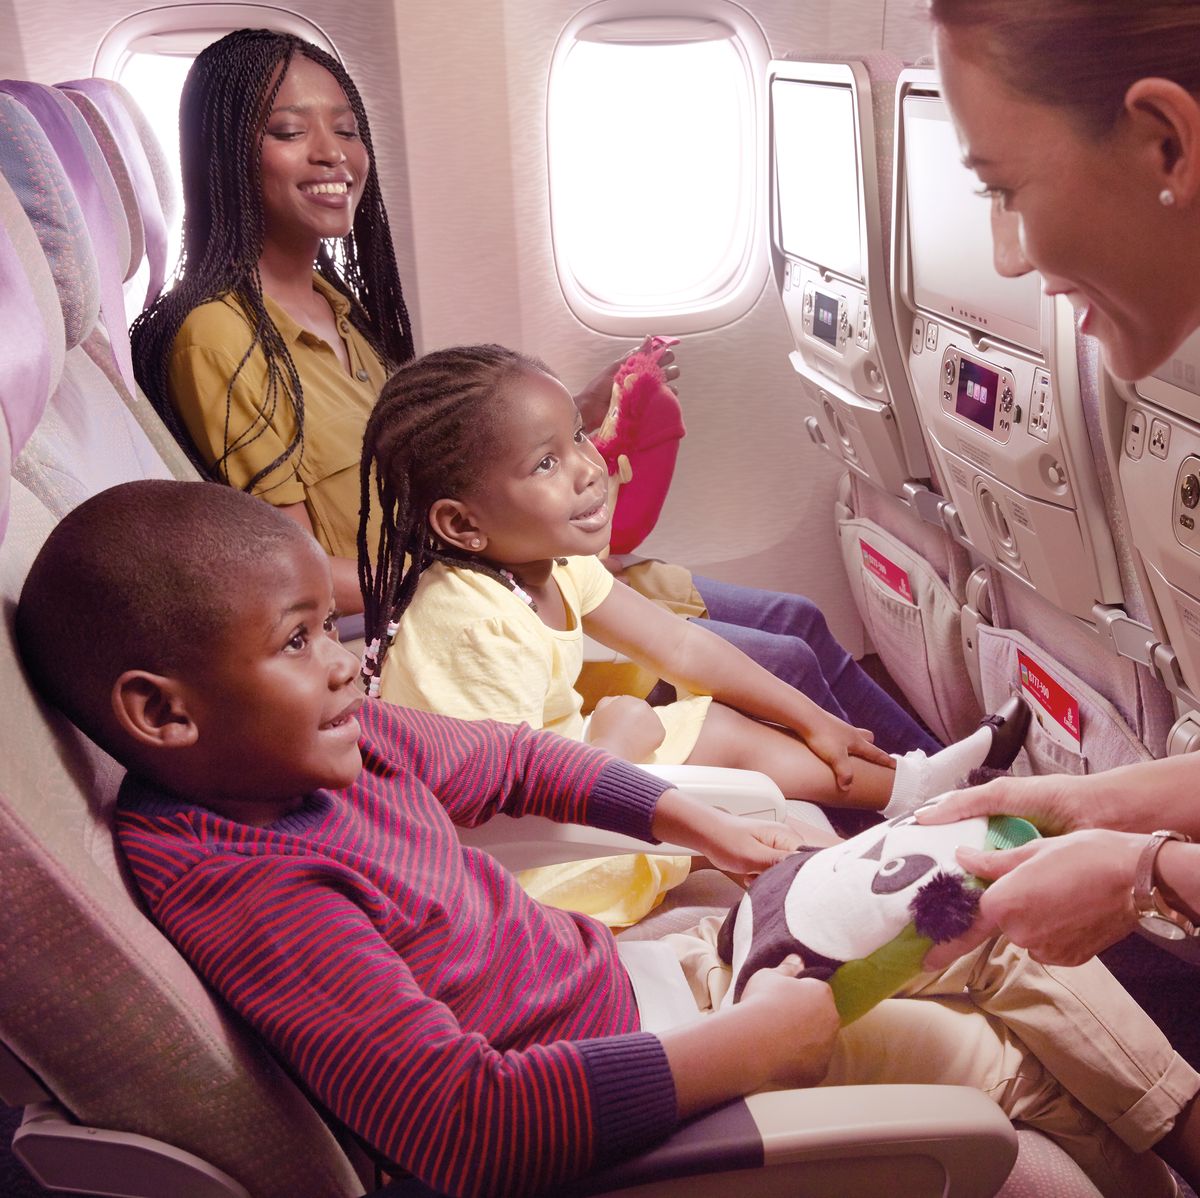 How To Survive a Long-Haul Flight With Kids, According to An